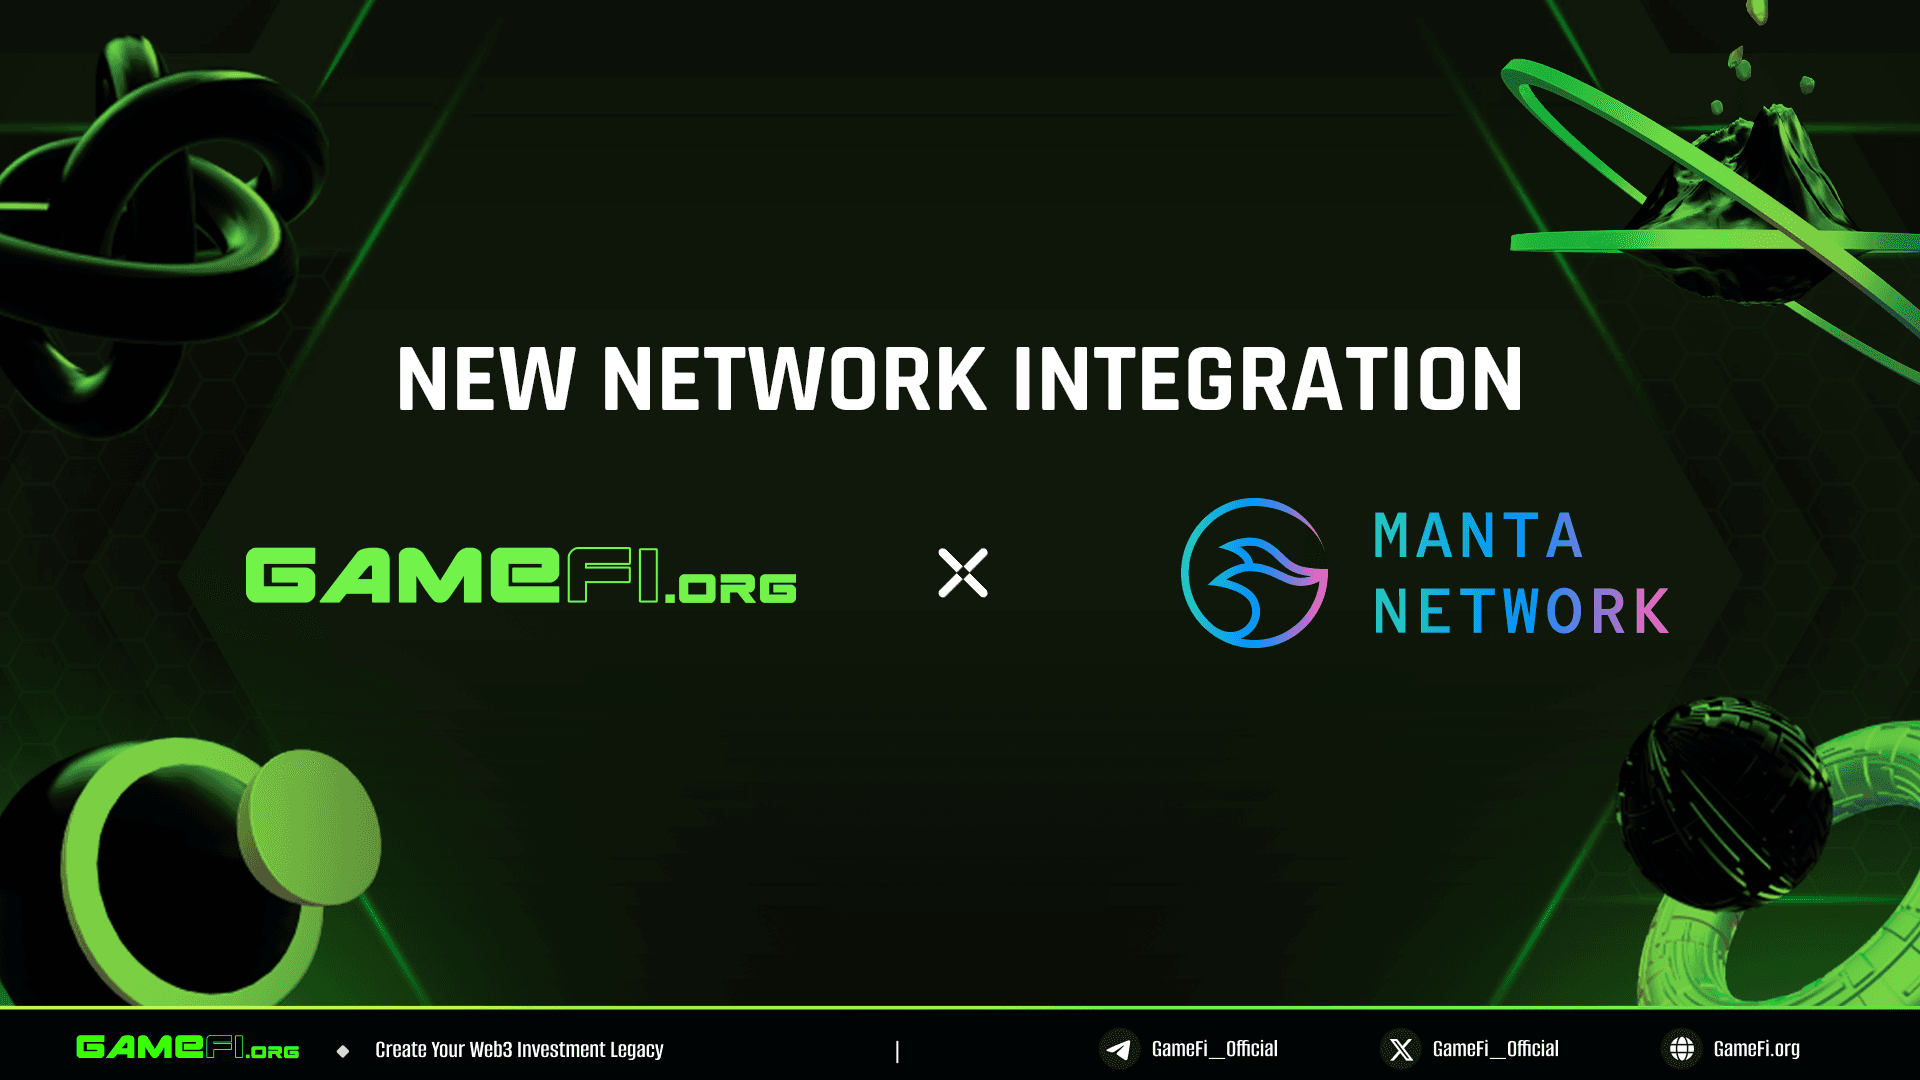 GameFi.org Successfully Integrates With The Manta Network